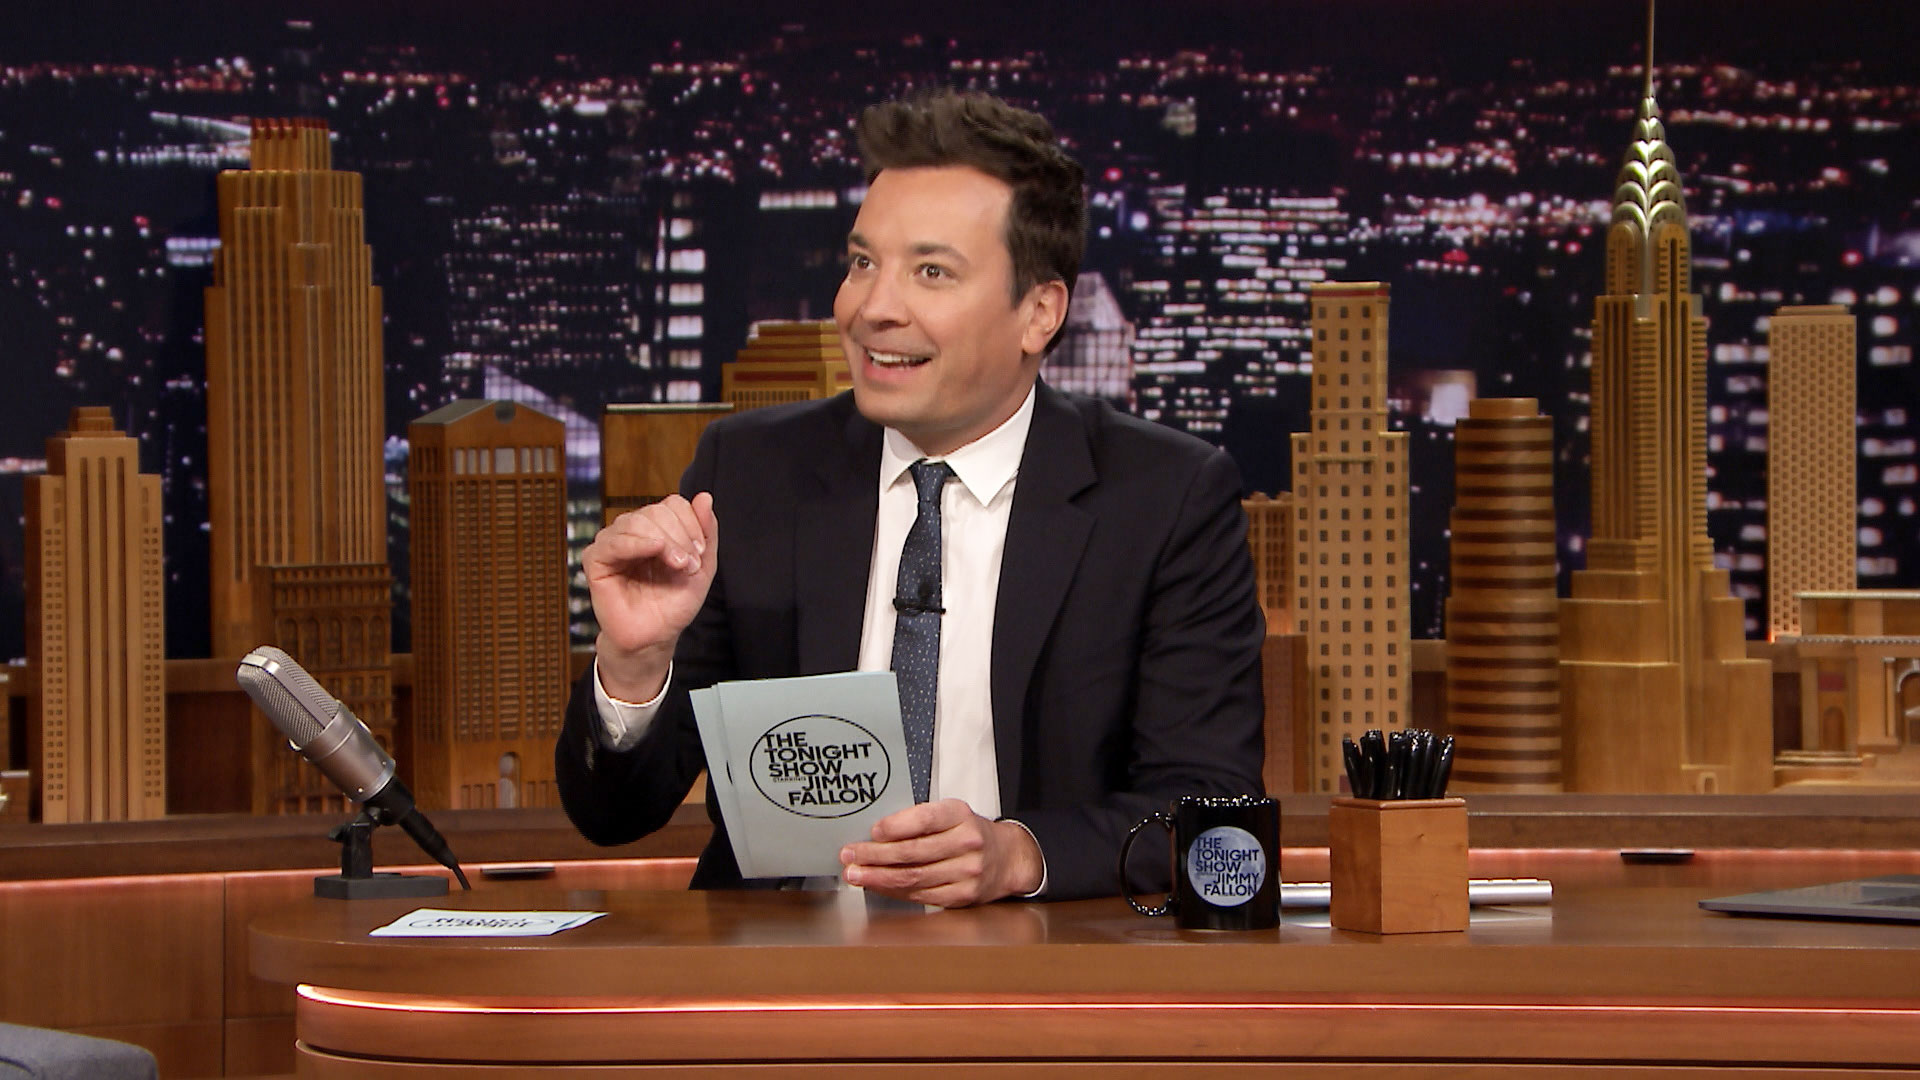 Watch The Tonight Show Starring Jimmy Fallon Highlight Hashtags Myweirdroommate 0620